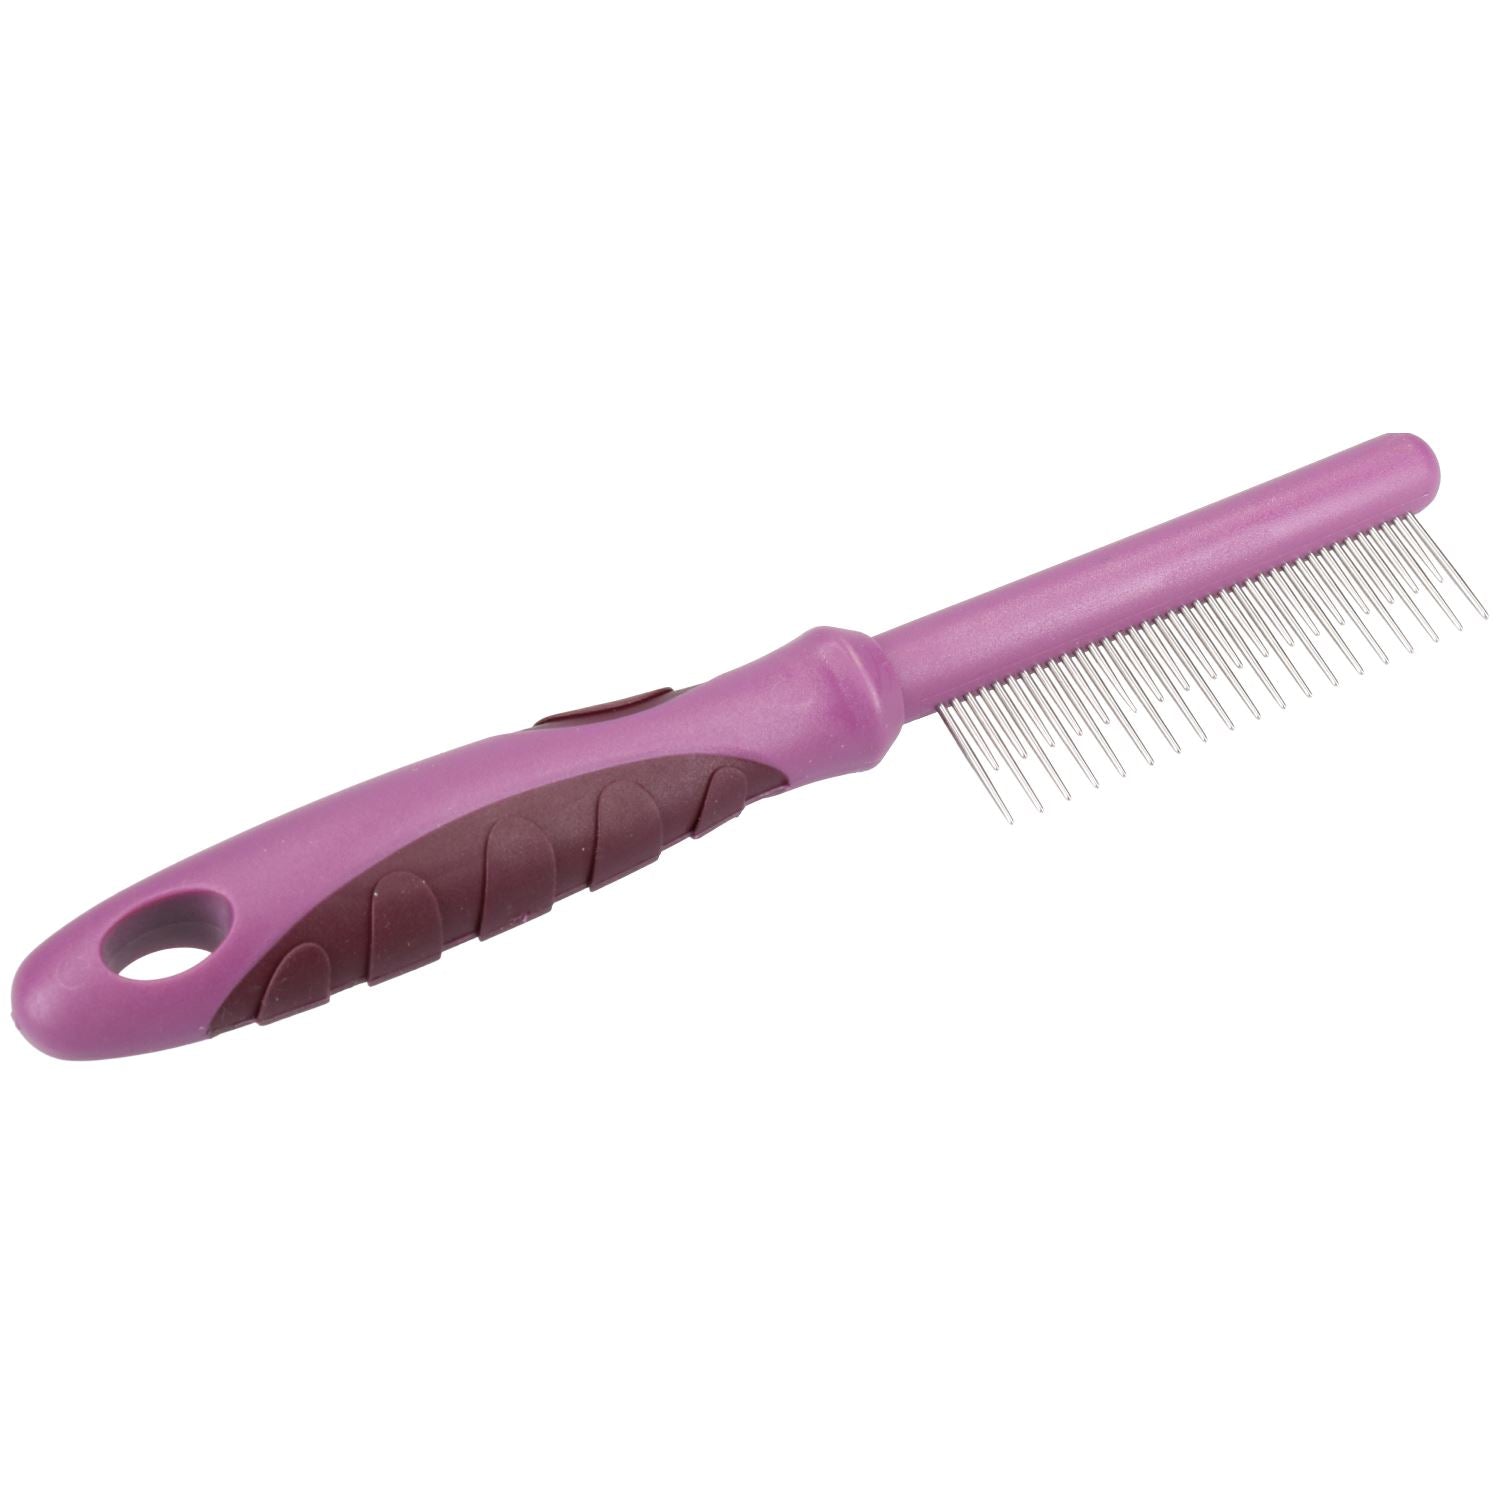 Soft Protection Dog Cat Pet Moulting Comb For Removal Of Knots & Tangles